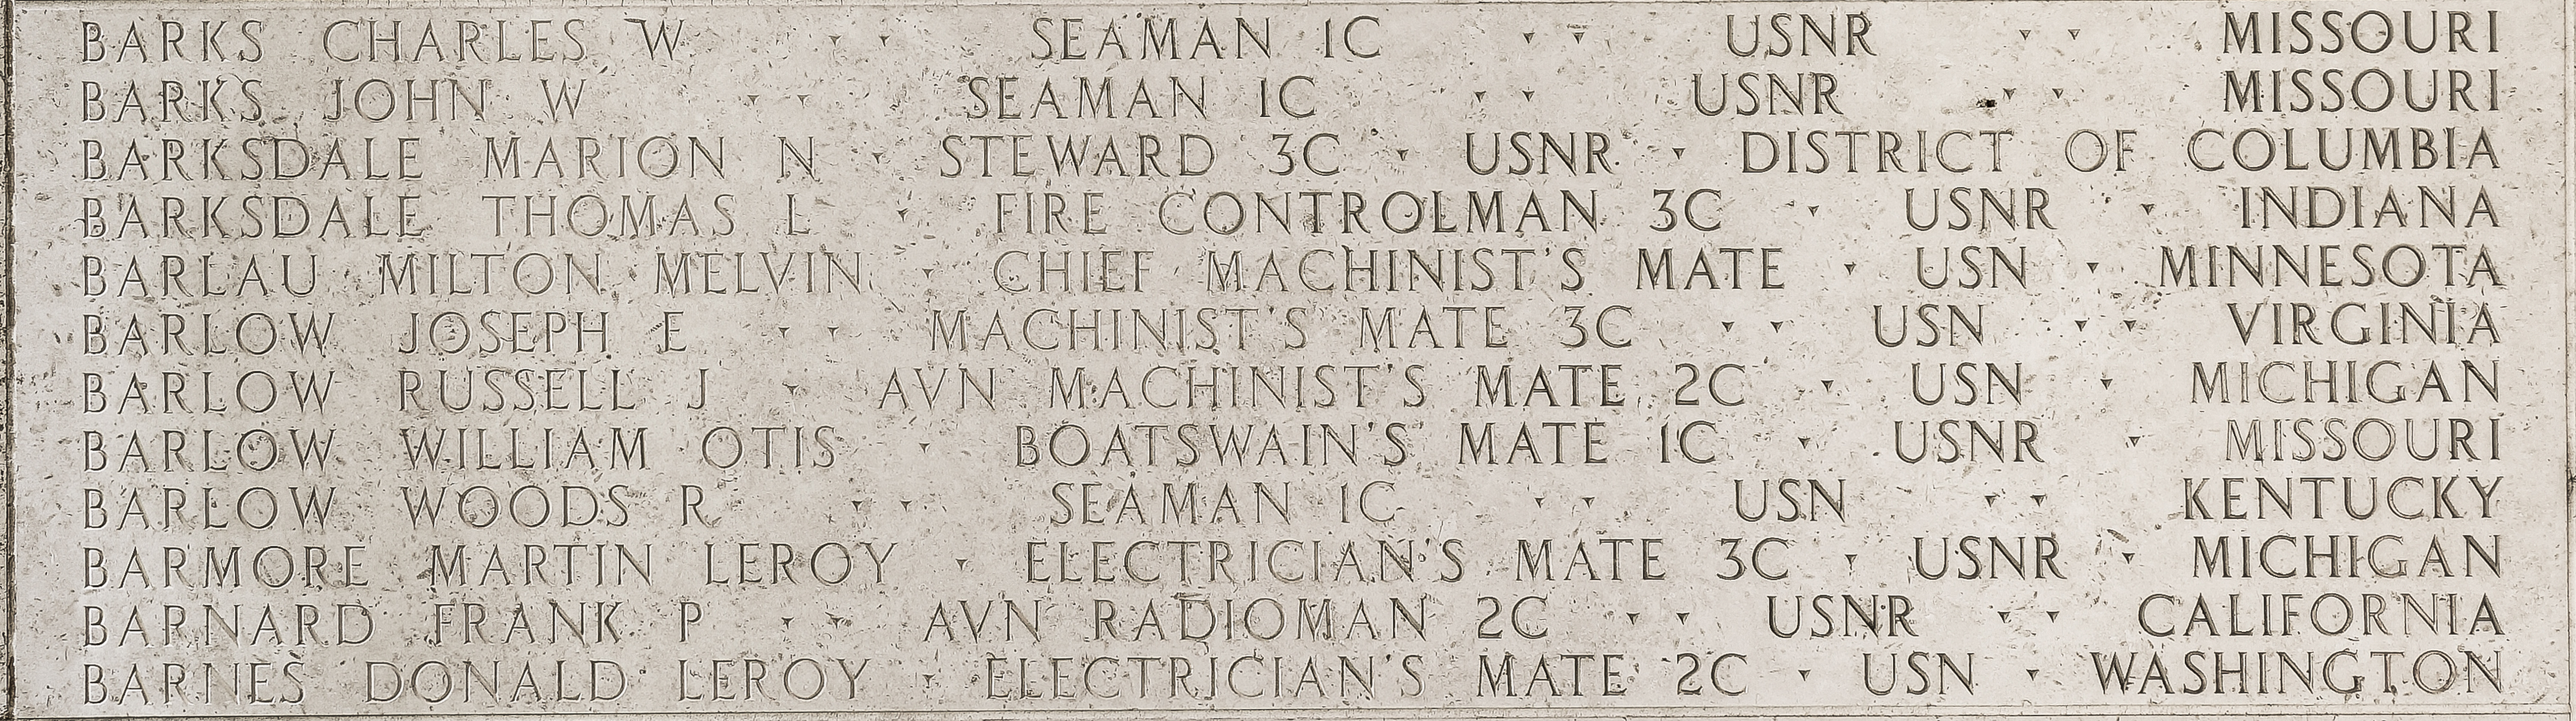 Martin Leroy Barmore, Electrician's Mate Third Class